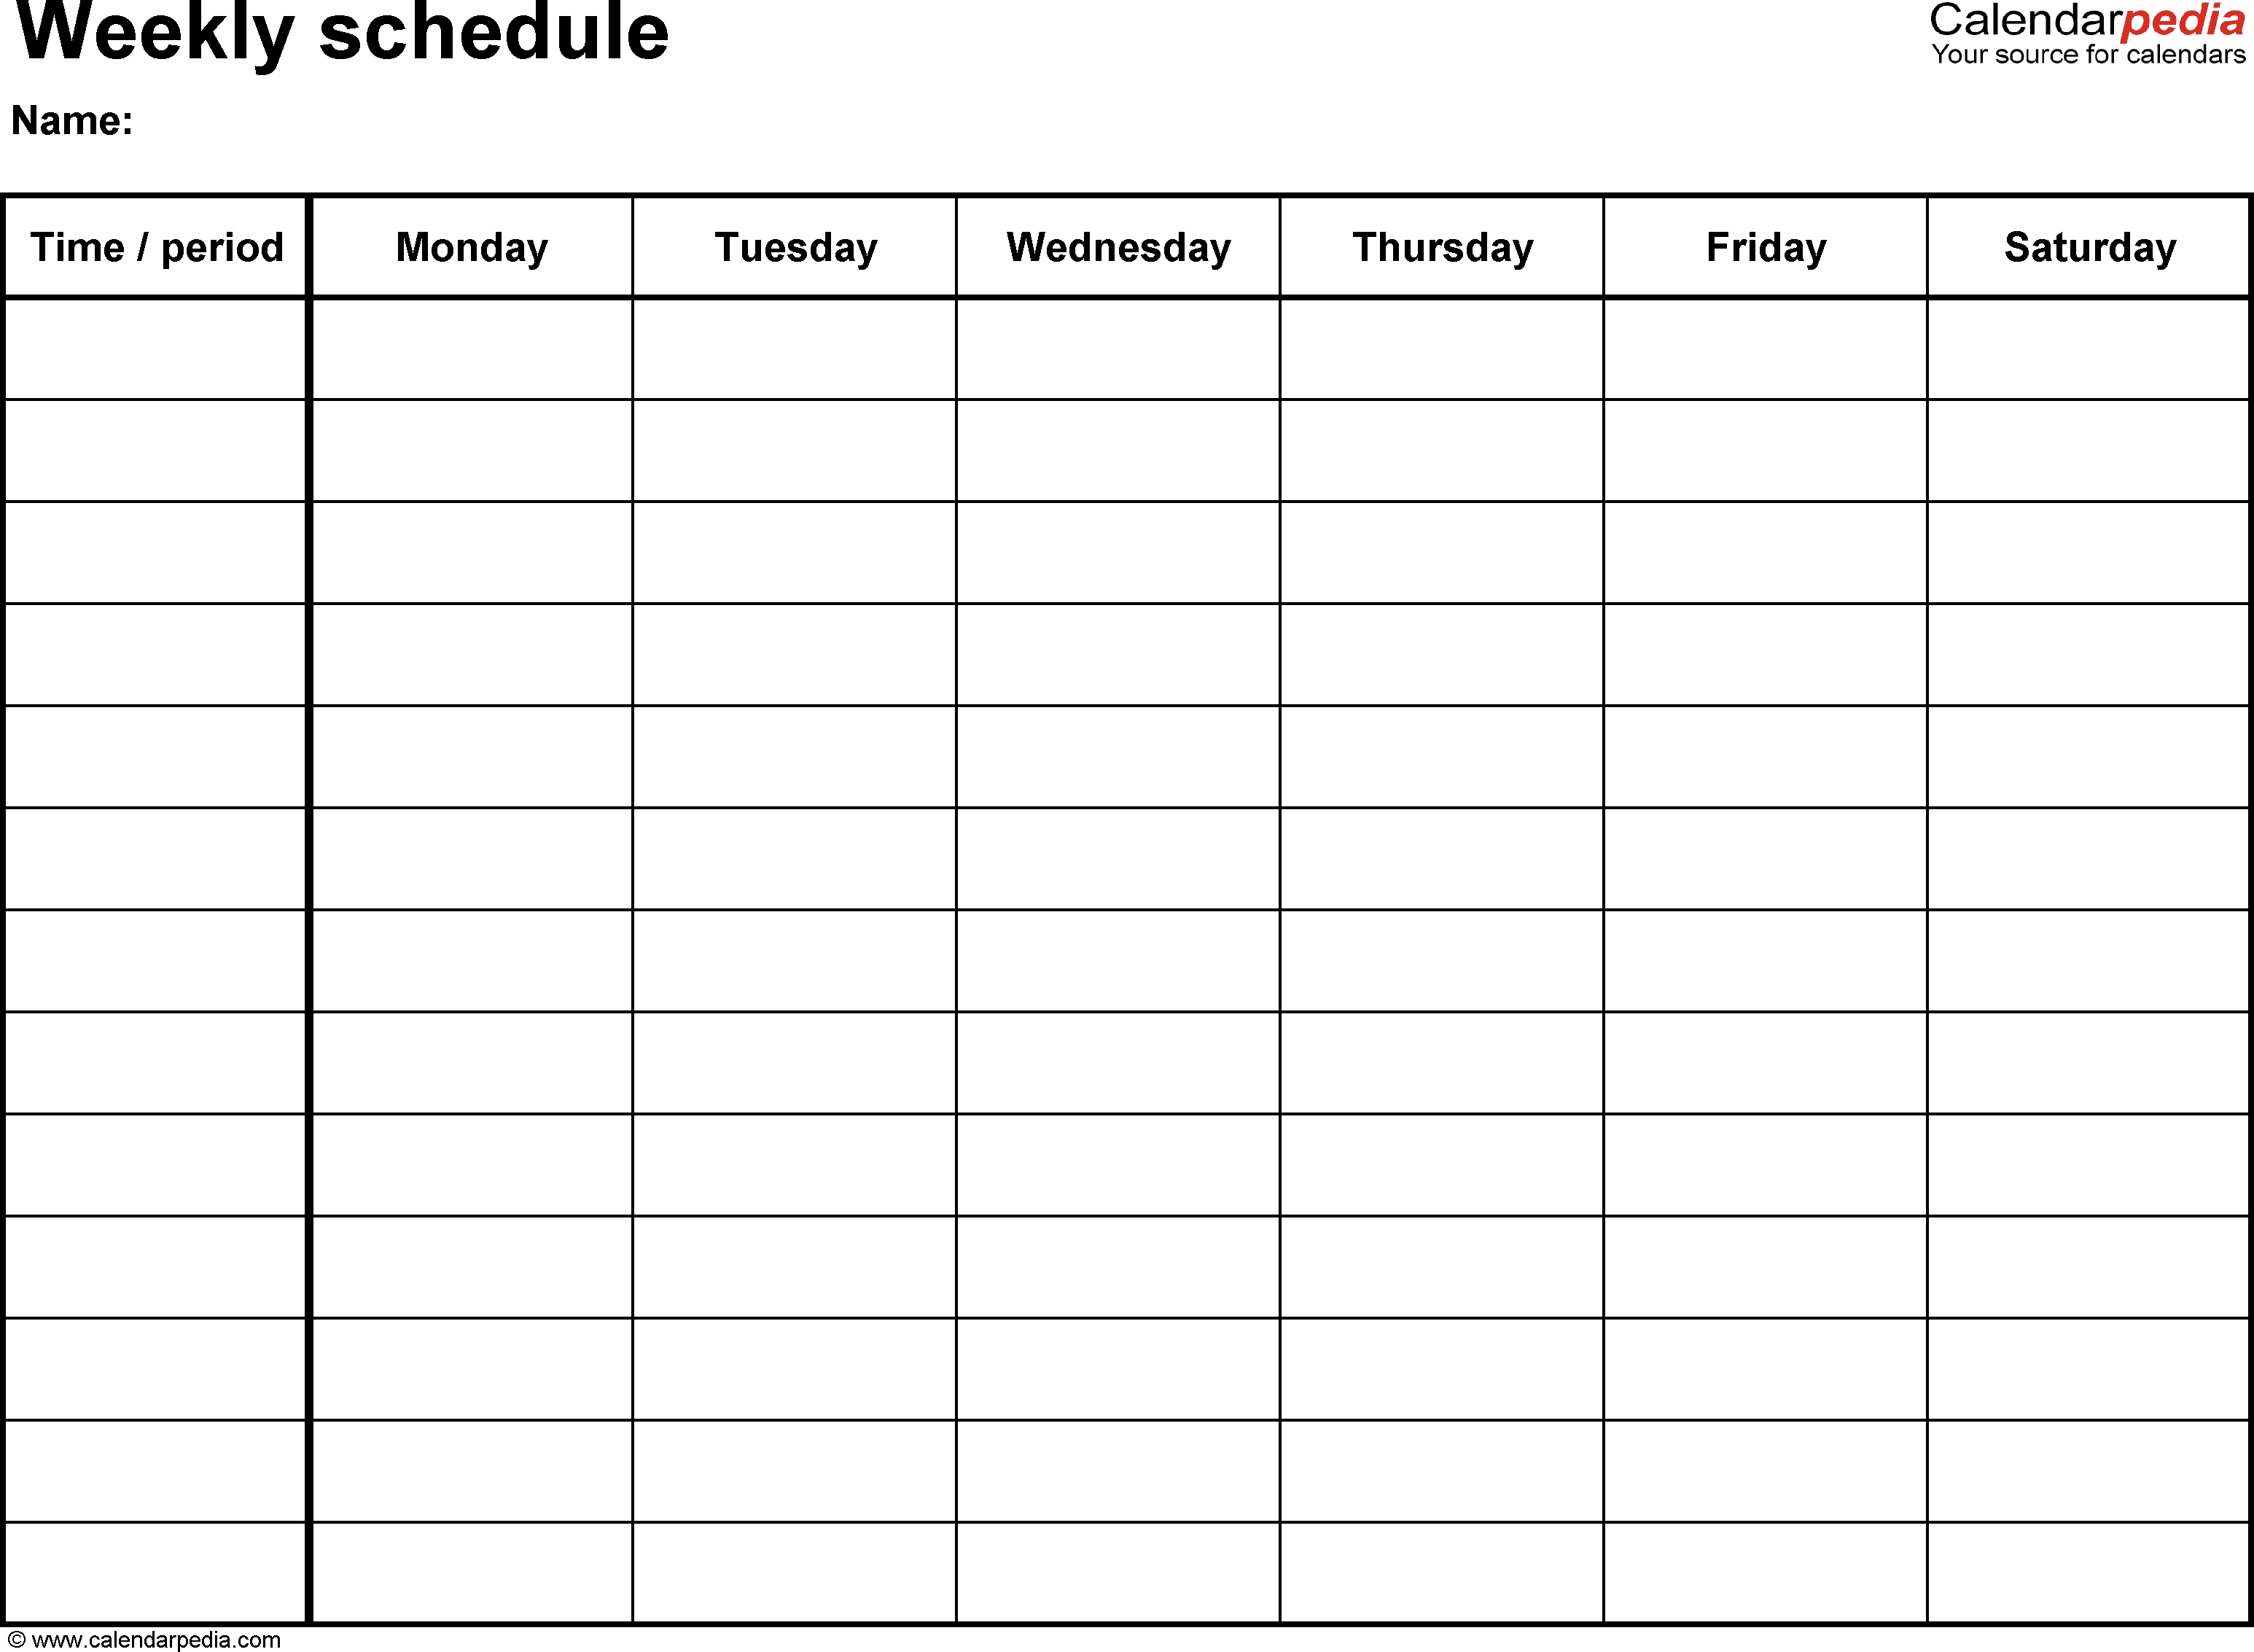 Free Weekly Schedule Templates For Word - 18 Templates regarding 6 Week Blank Schedule Template